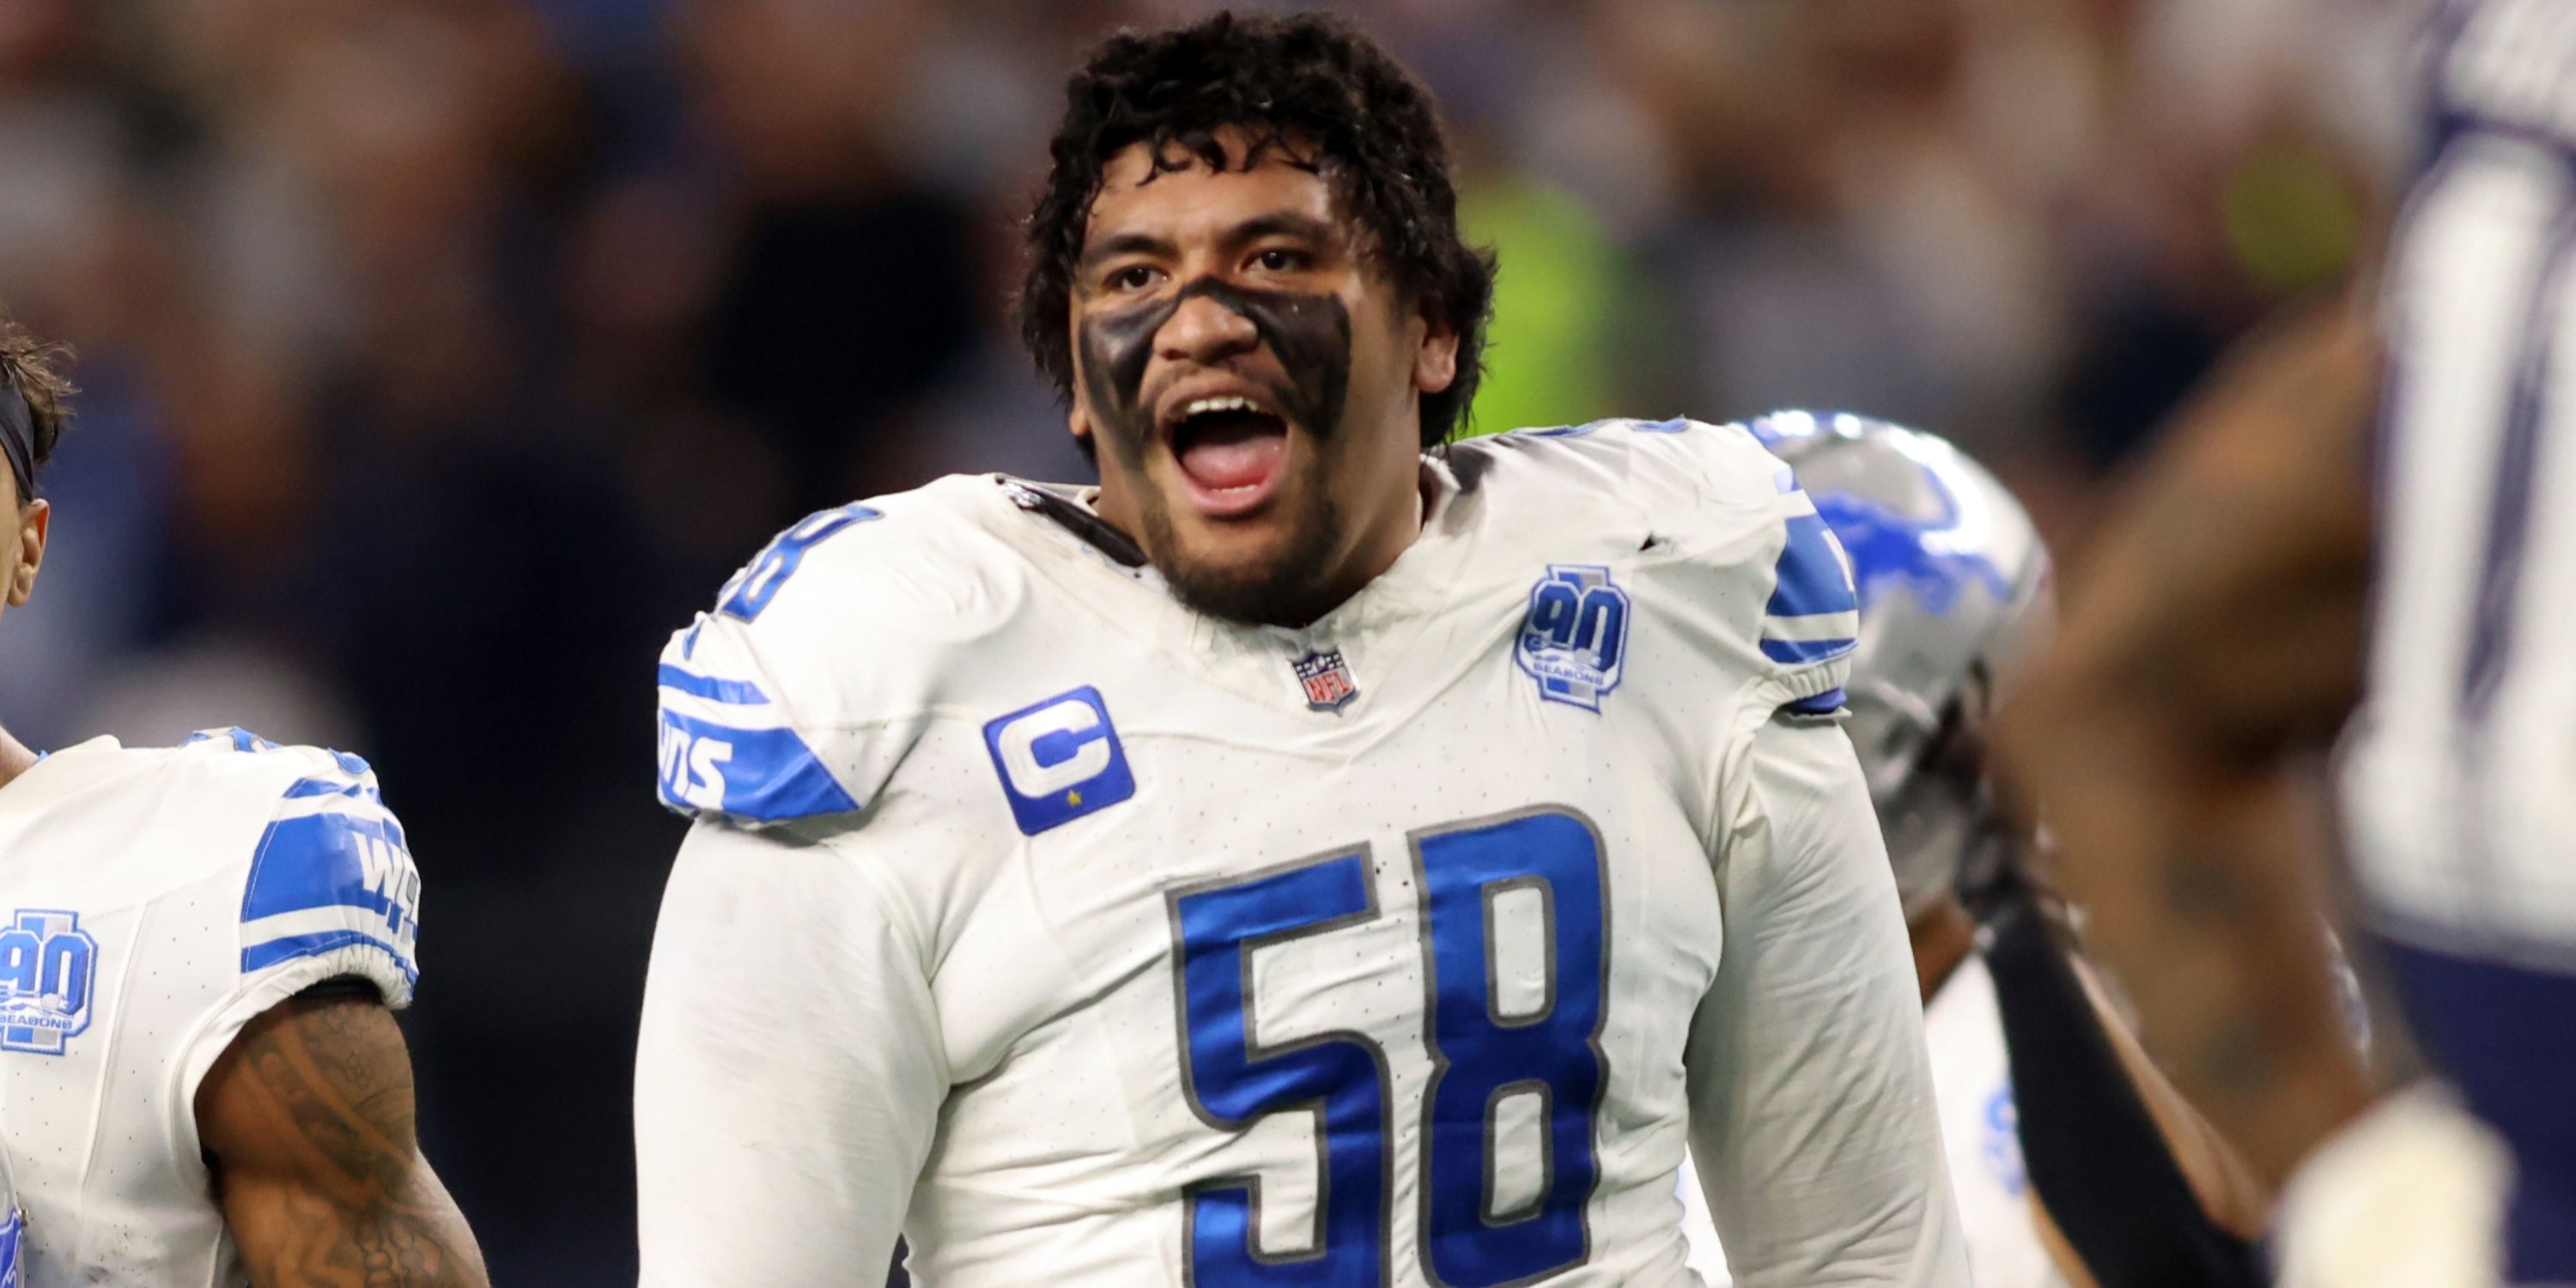 Report: Penei Sewell Receives Lions’ 2nd Record-Breaking Deal Of The Day